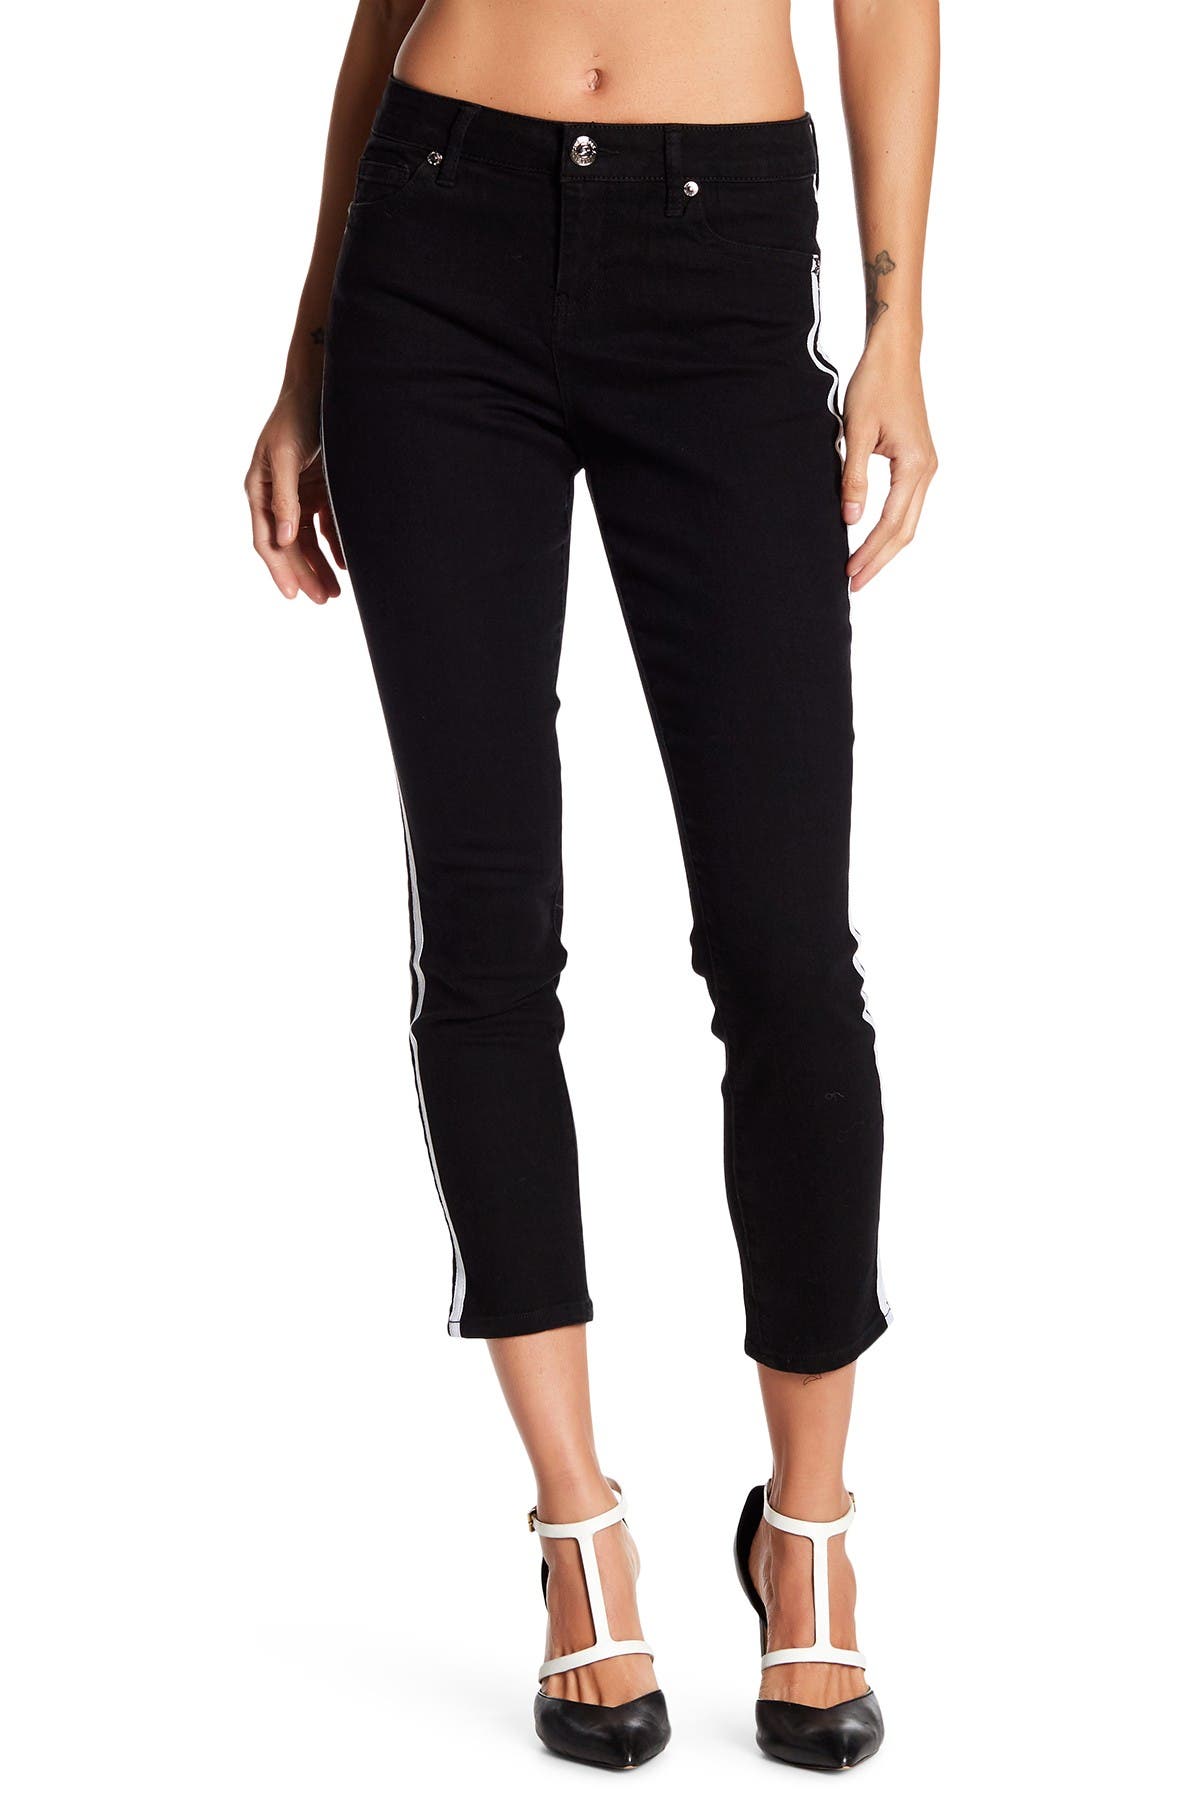 seven7 ankle skinny jeans